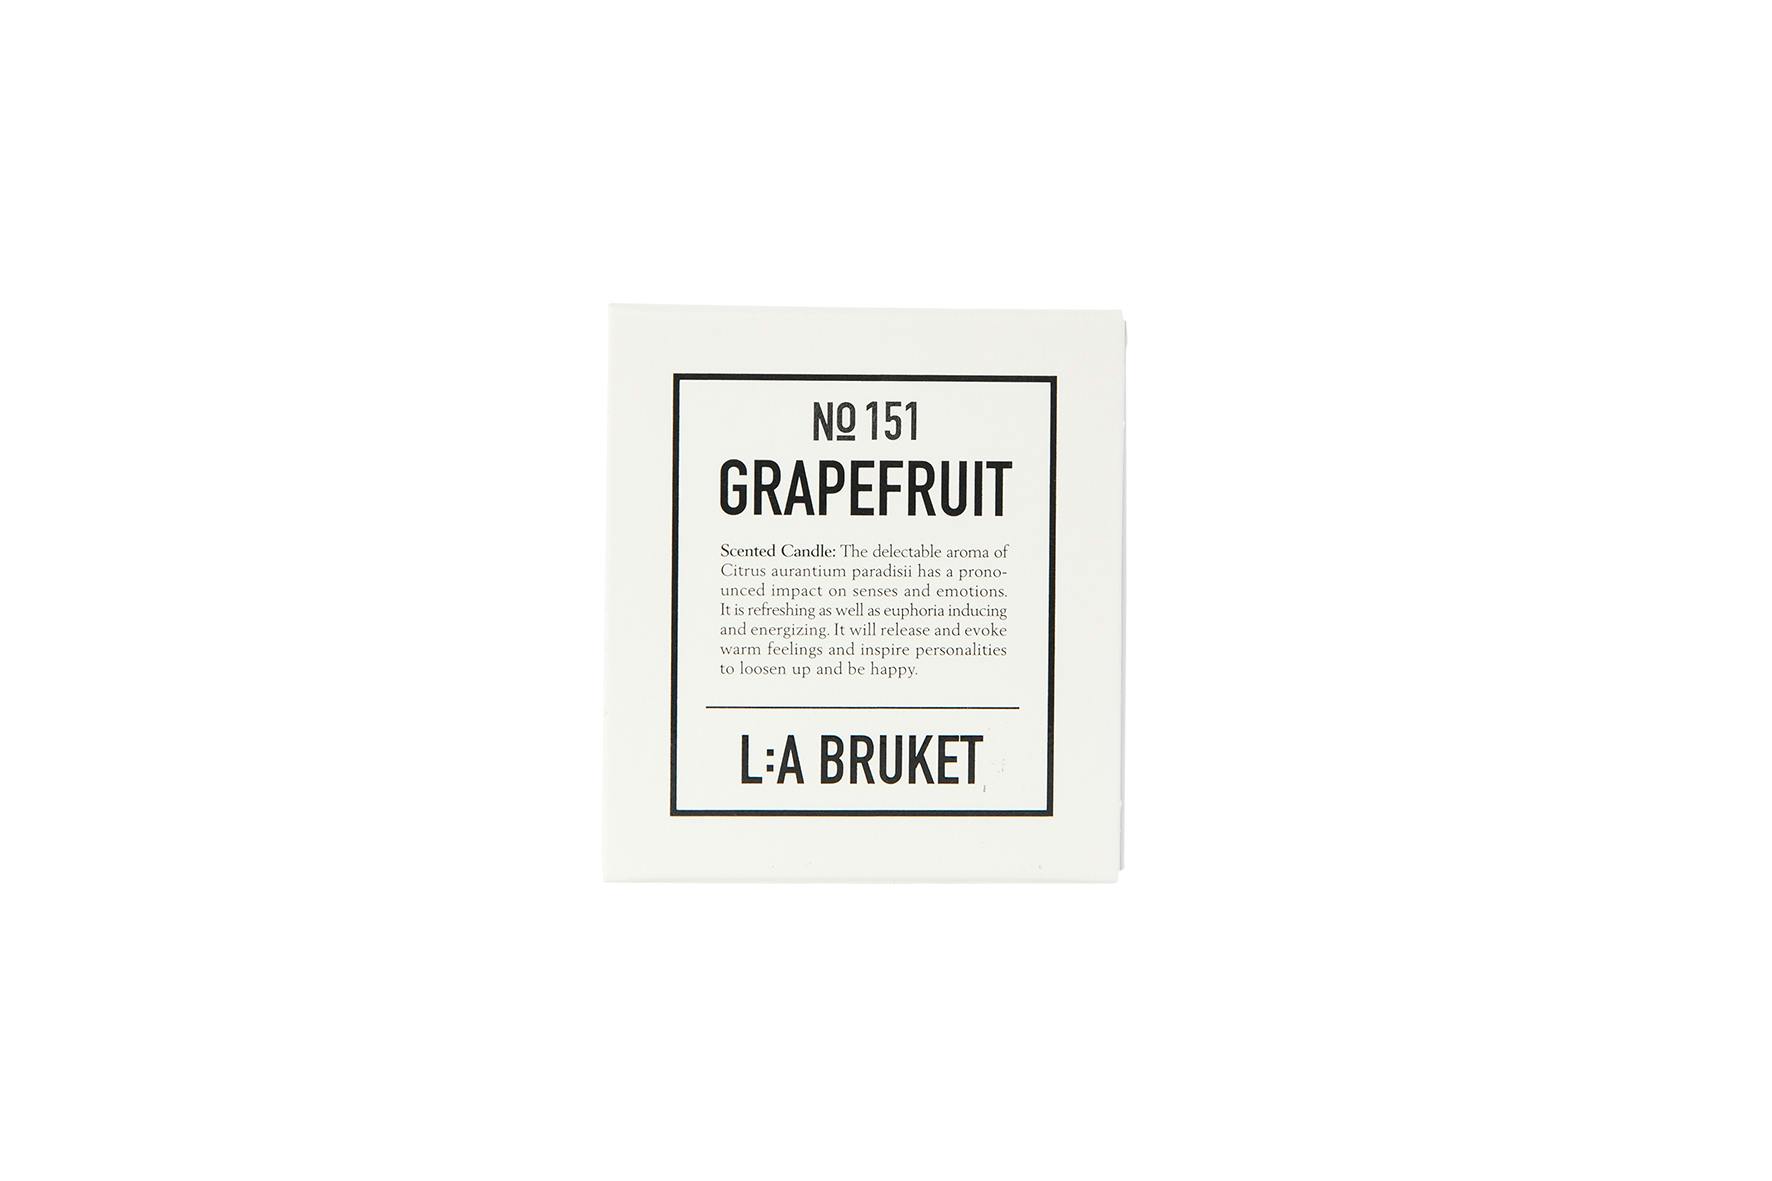 L:A Bruket candle, Swedish gifts. vegan candle, grapefruit, natural candles, organic, Nordic style, travel candles